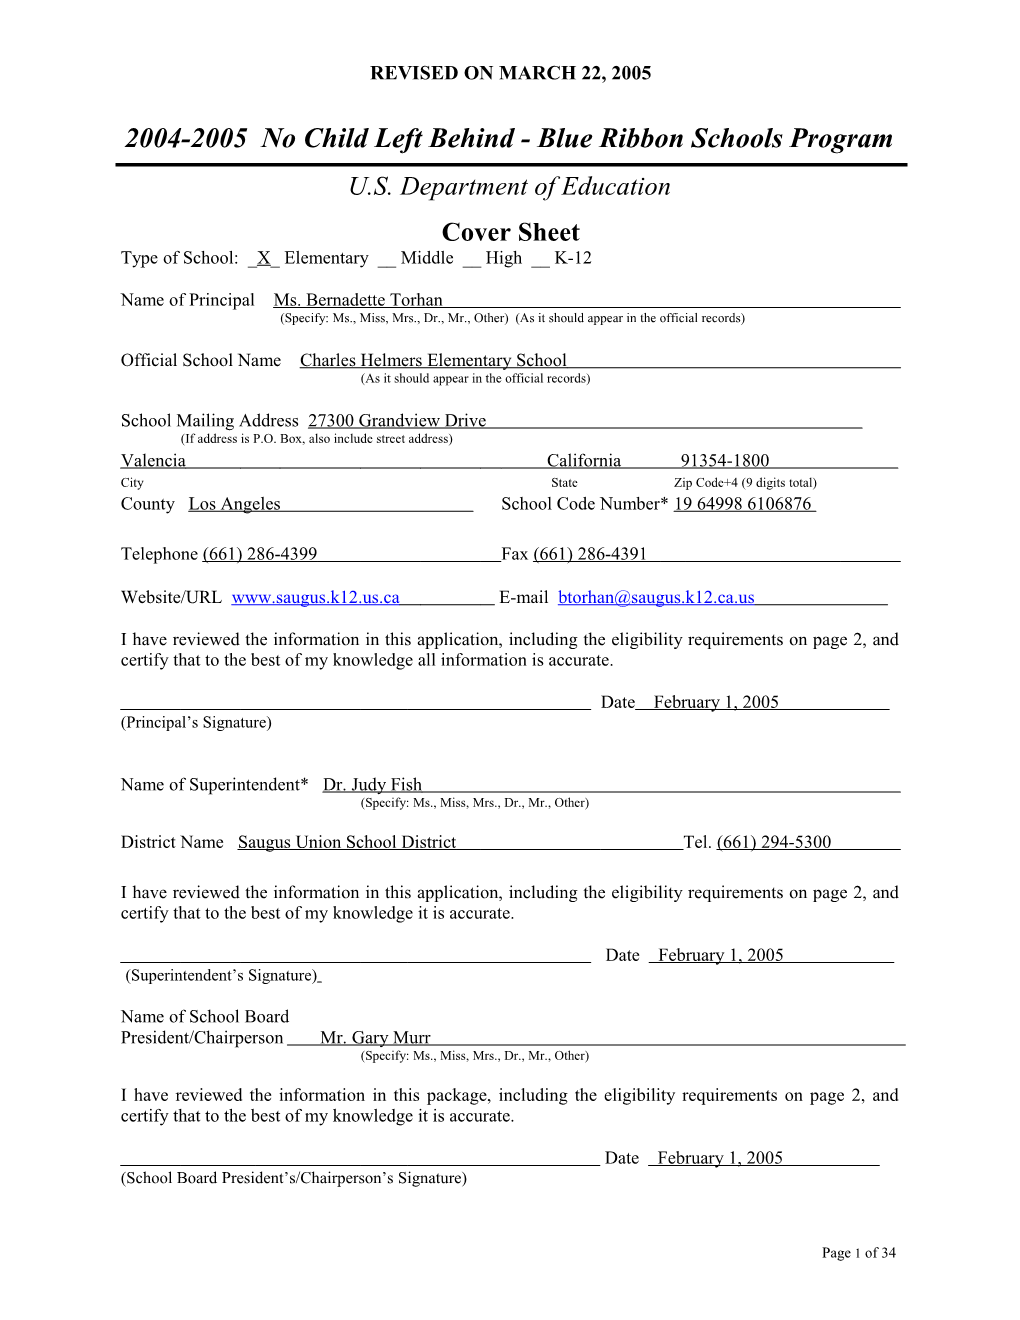 Charles Helmers Elementary School Application: 2004-2005, No Child Left Behind - Blue Ribbon